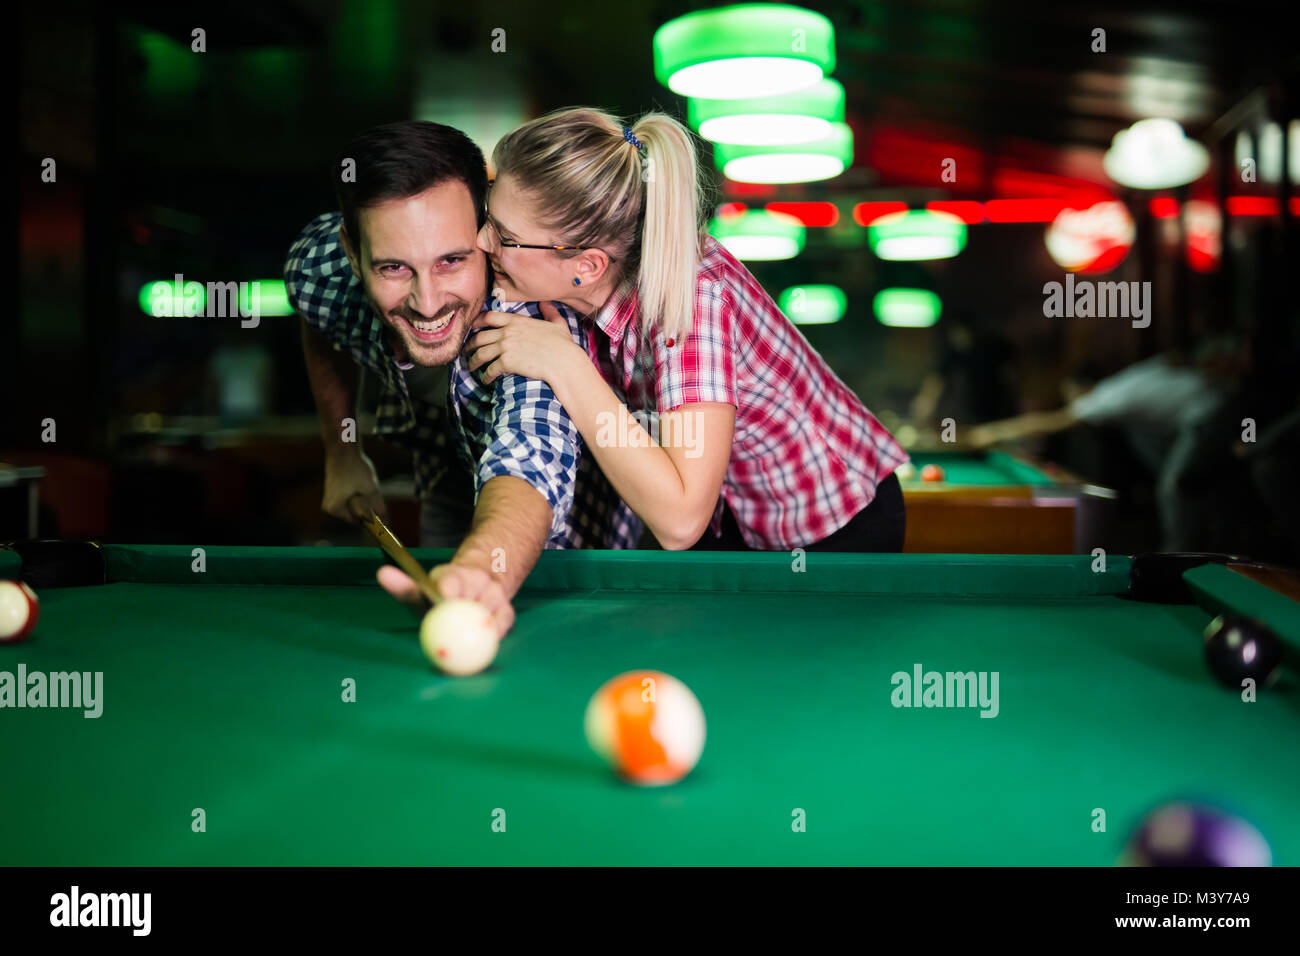 Young couple playing snooker together in bar Stock Photo